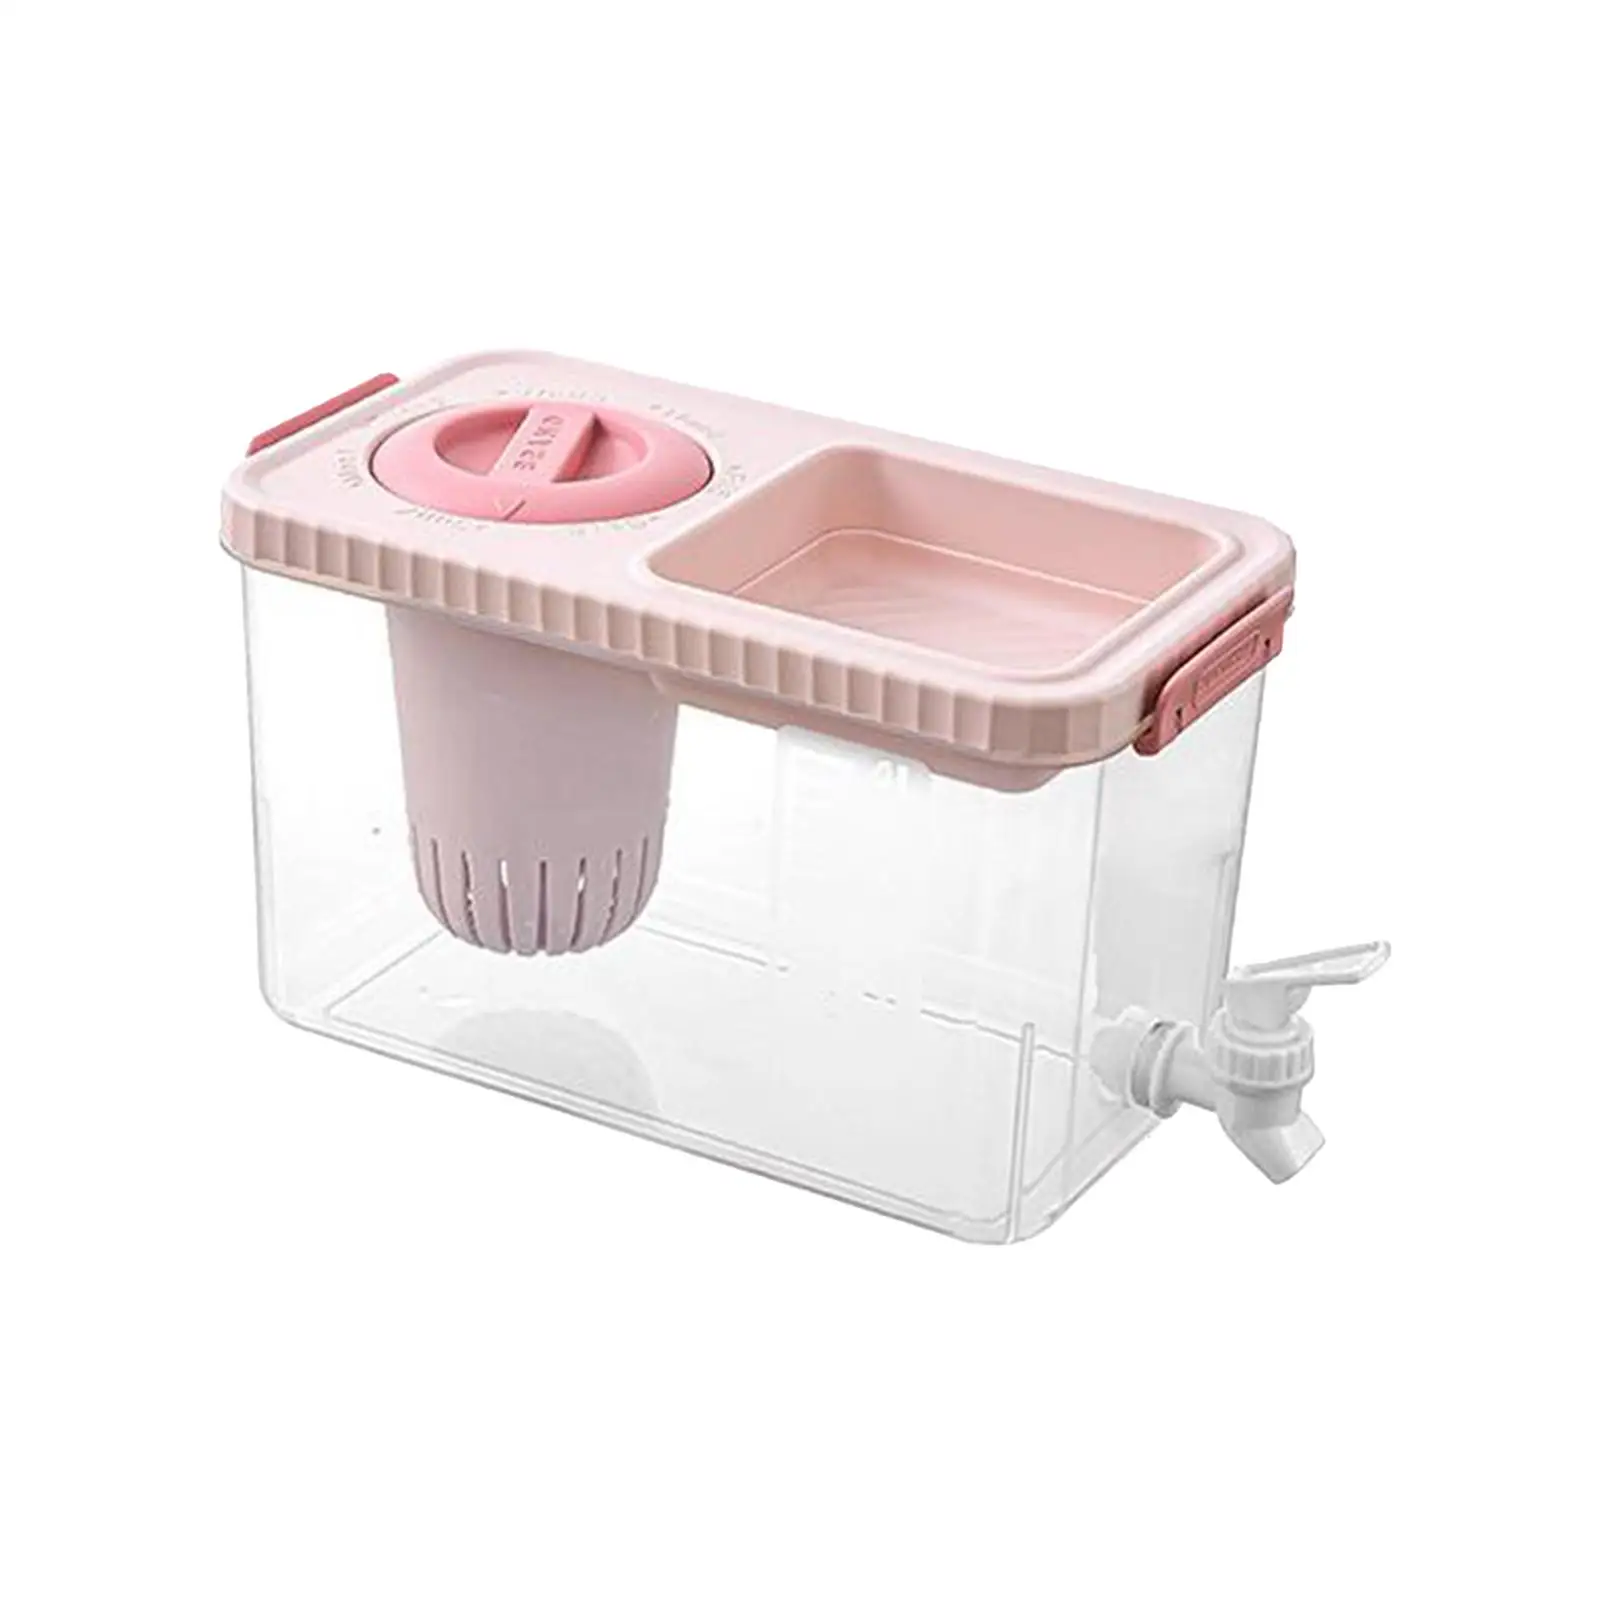 Refrigerator Cold Kettle Container with Spigot Portable Iced Beverage Dispenser for Outdoor Home Fridge Fridge kitchen